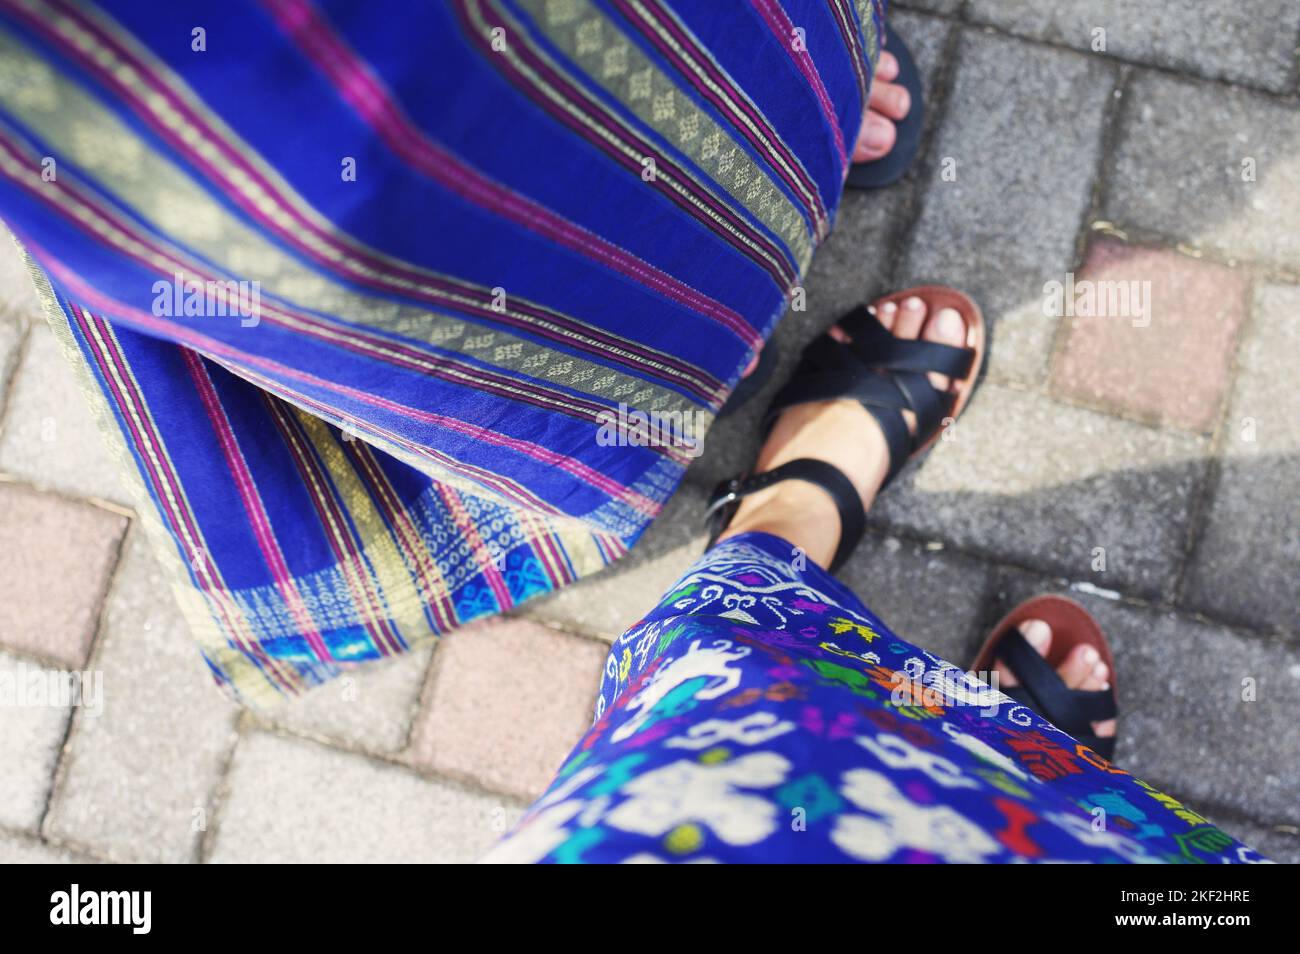 Two tourists in sandals wearing blue embroidered and batik patterned sarongs at a temple in Ubud — Bali, Indonesia Stock Photo